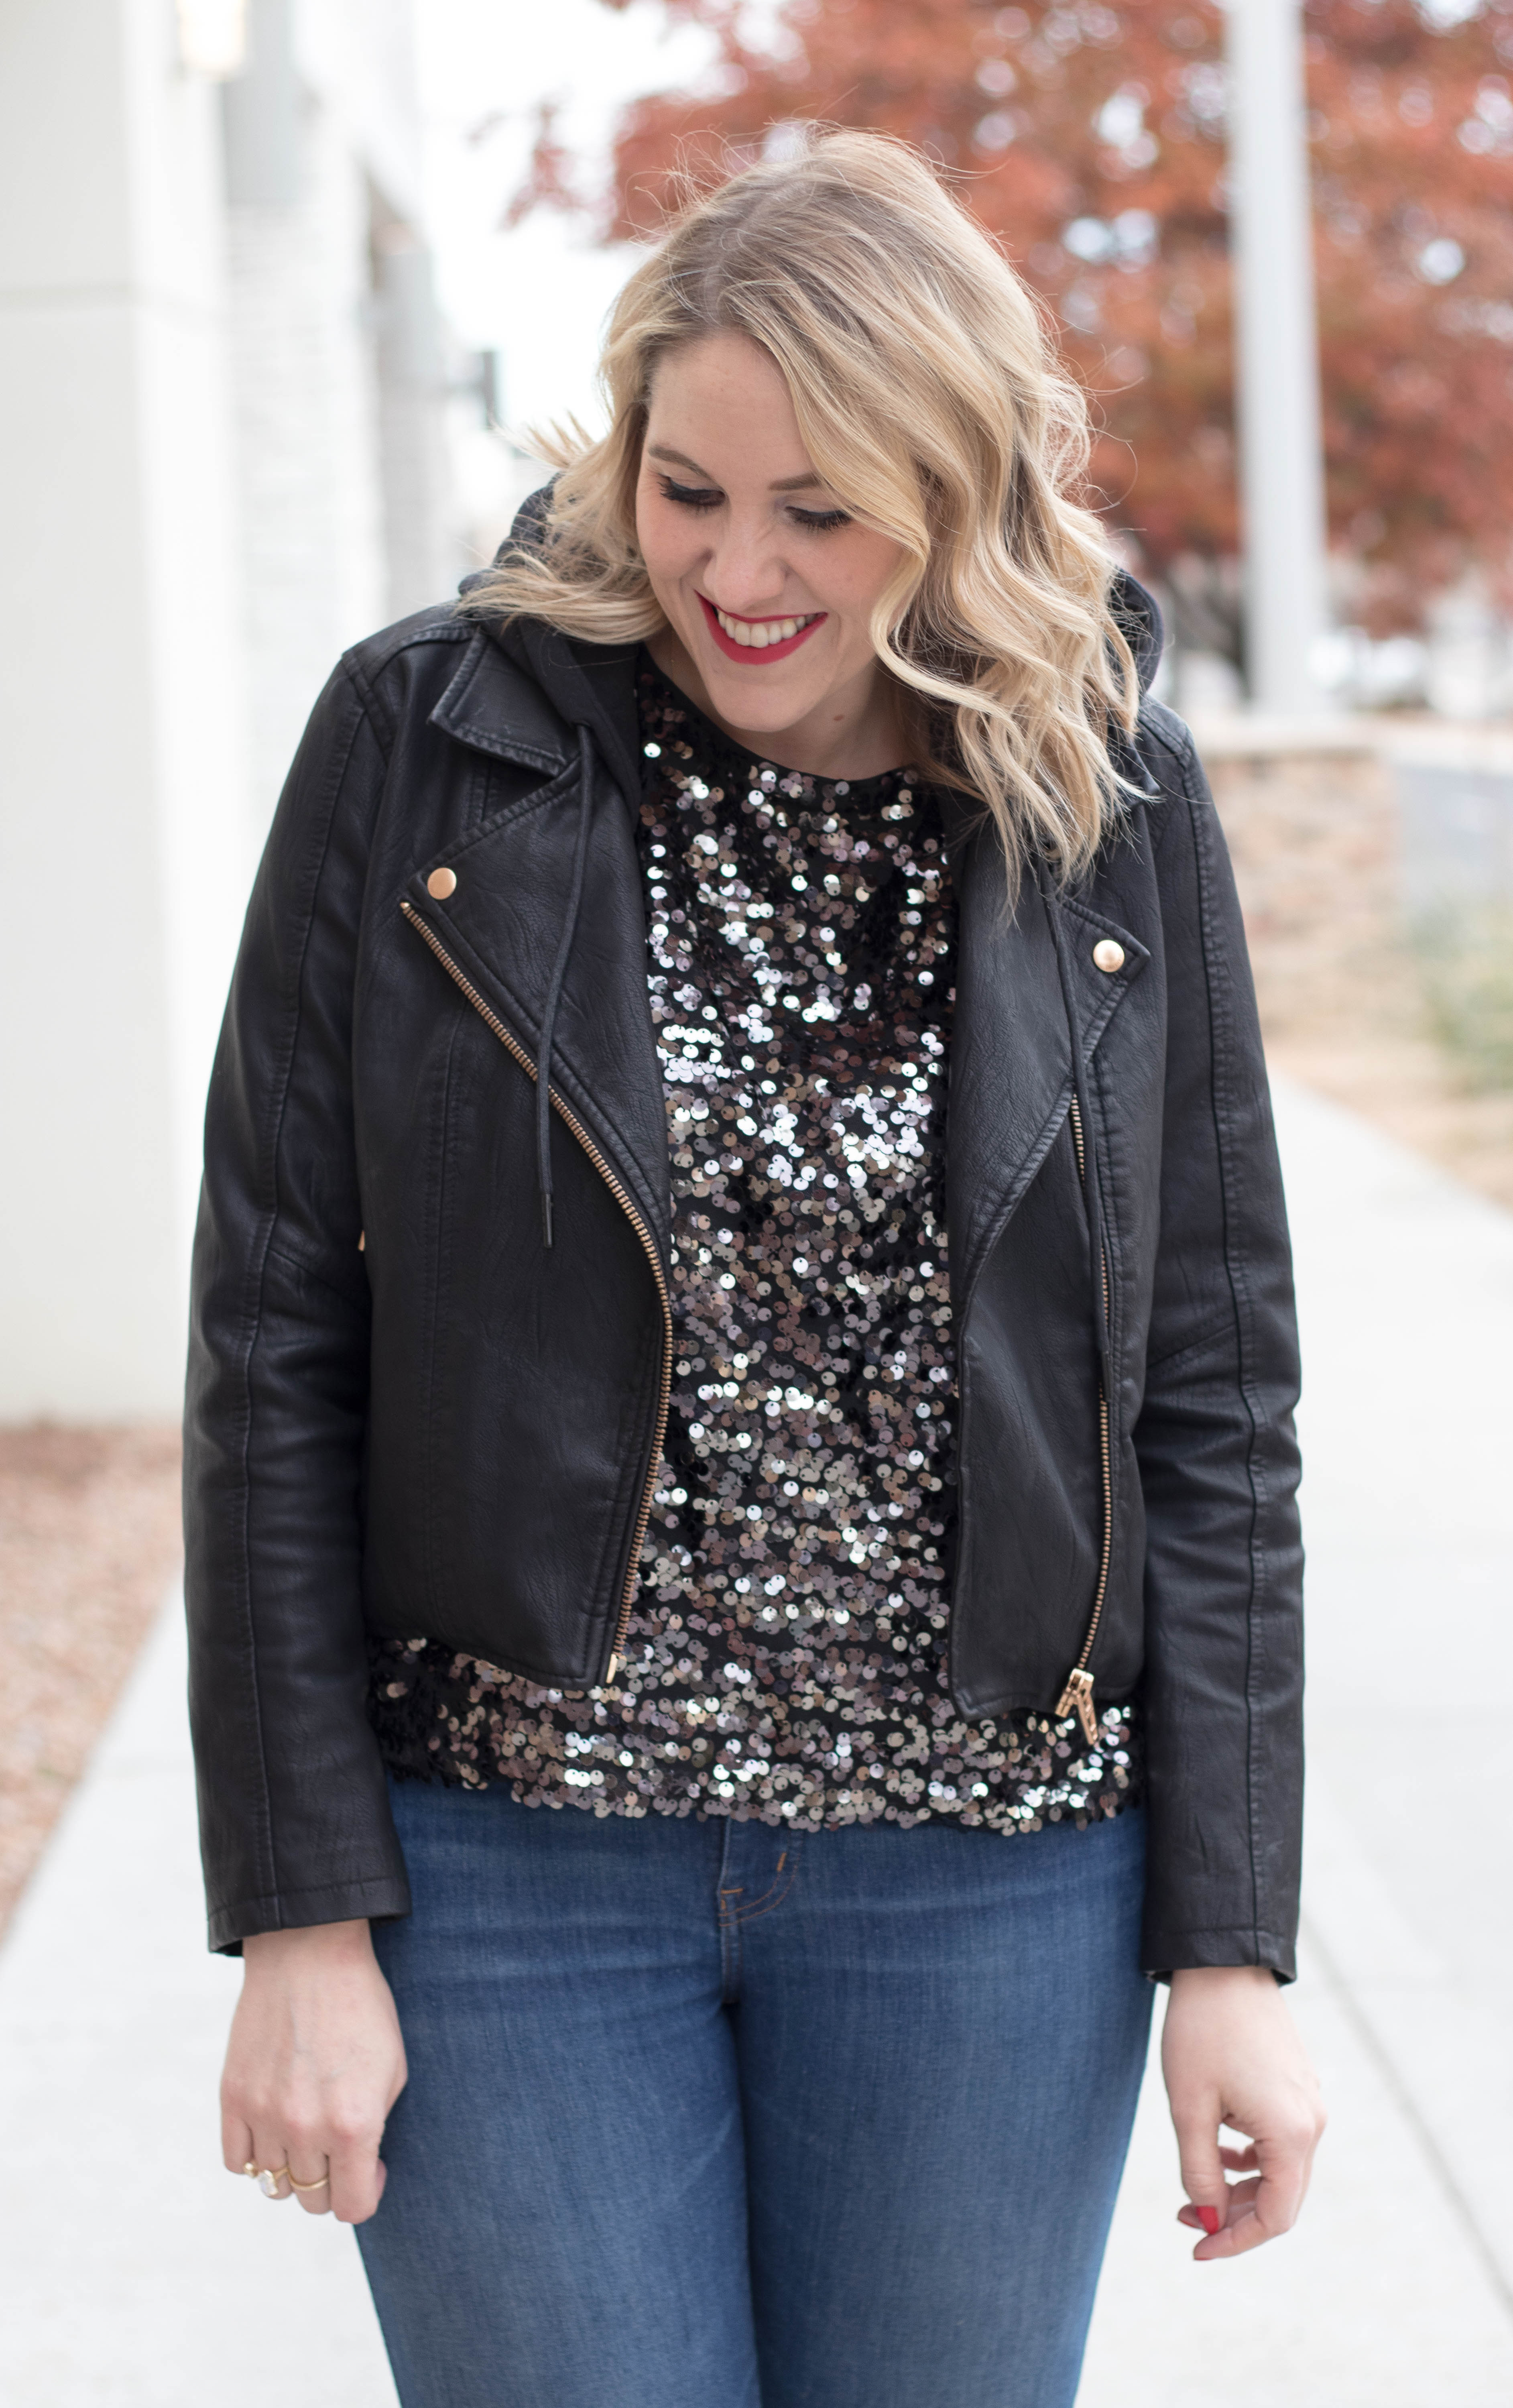 sequin top leather hooded jacket outfit #sequins #holidaystyle #sequintop